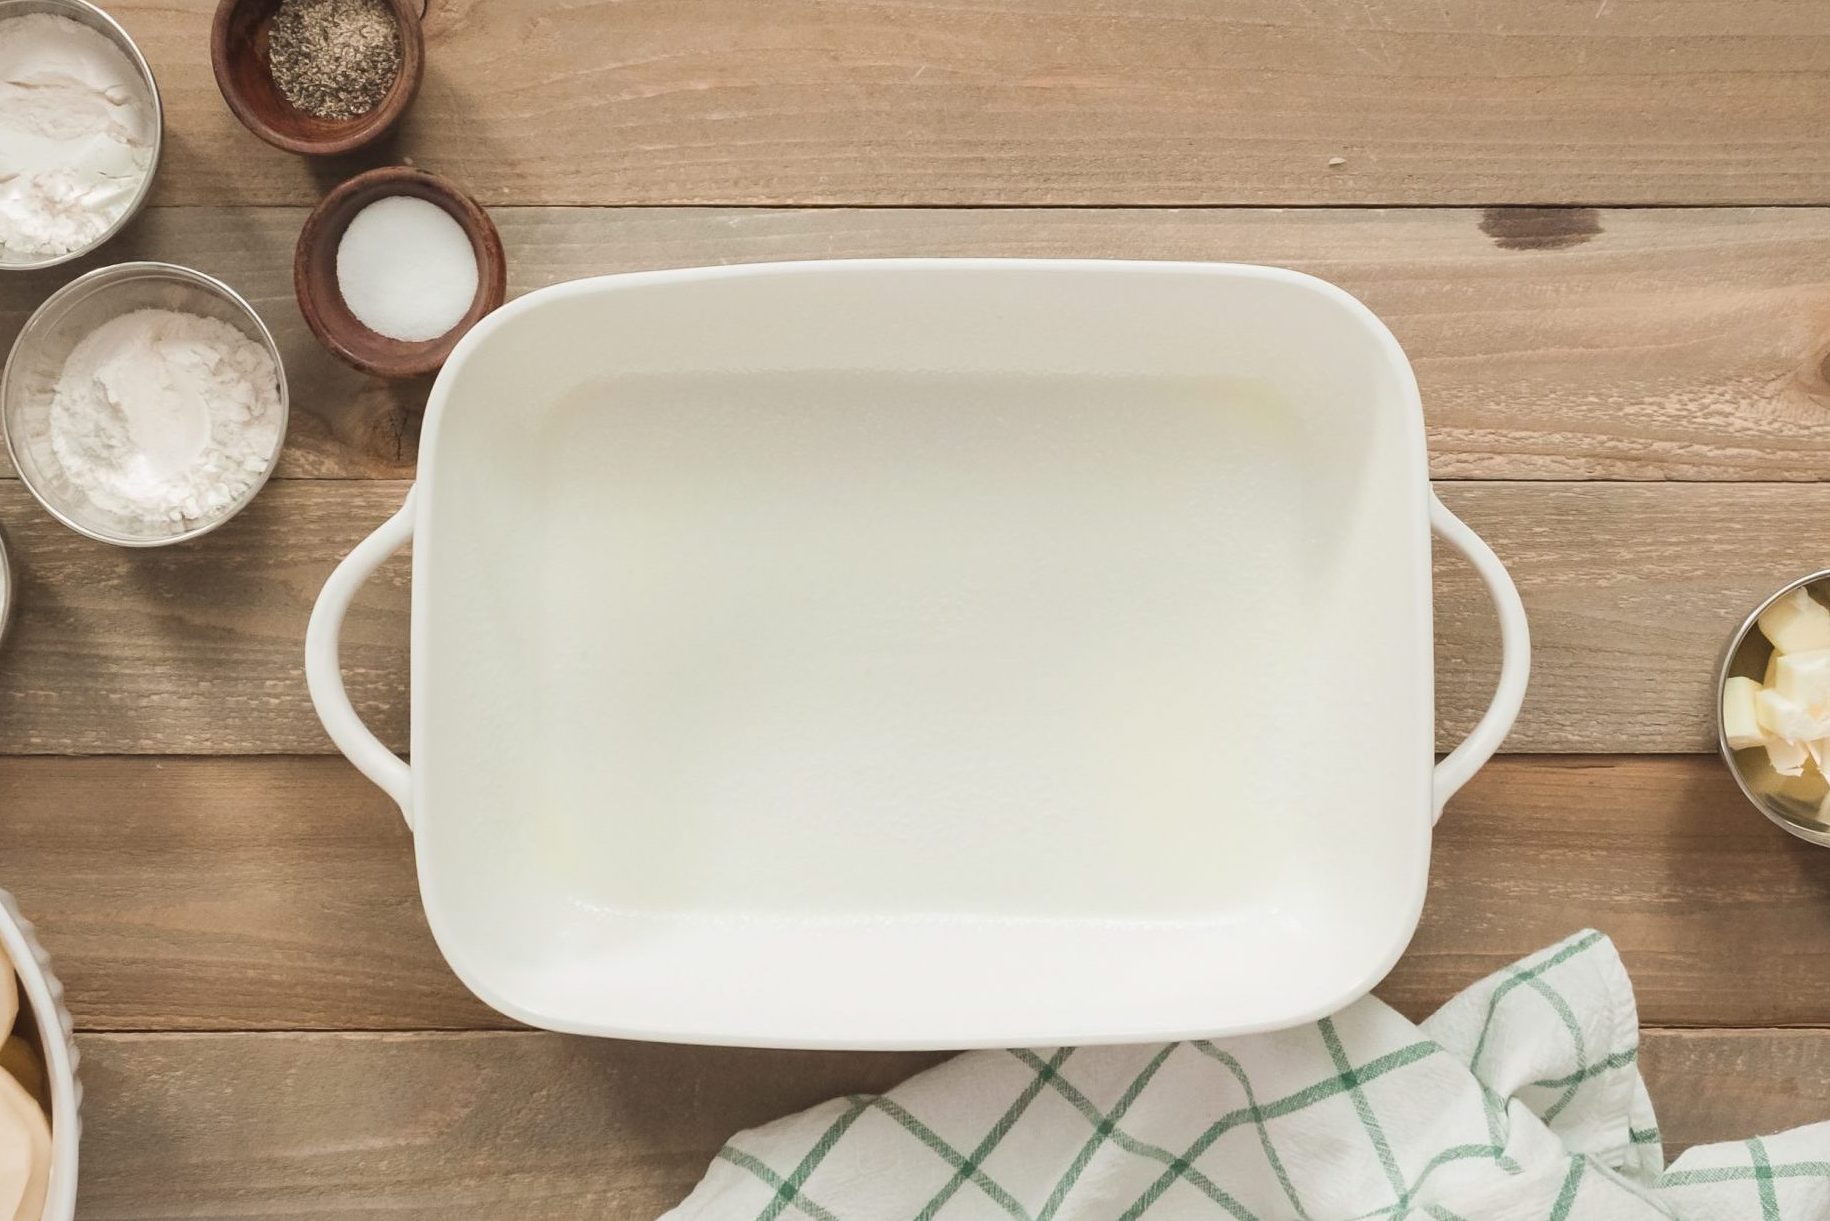 Roasting Pan vs. Baking Tray: What's the Difference?